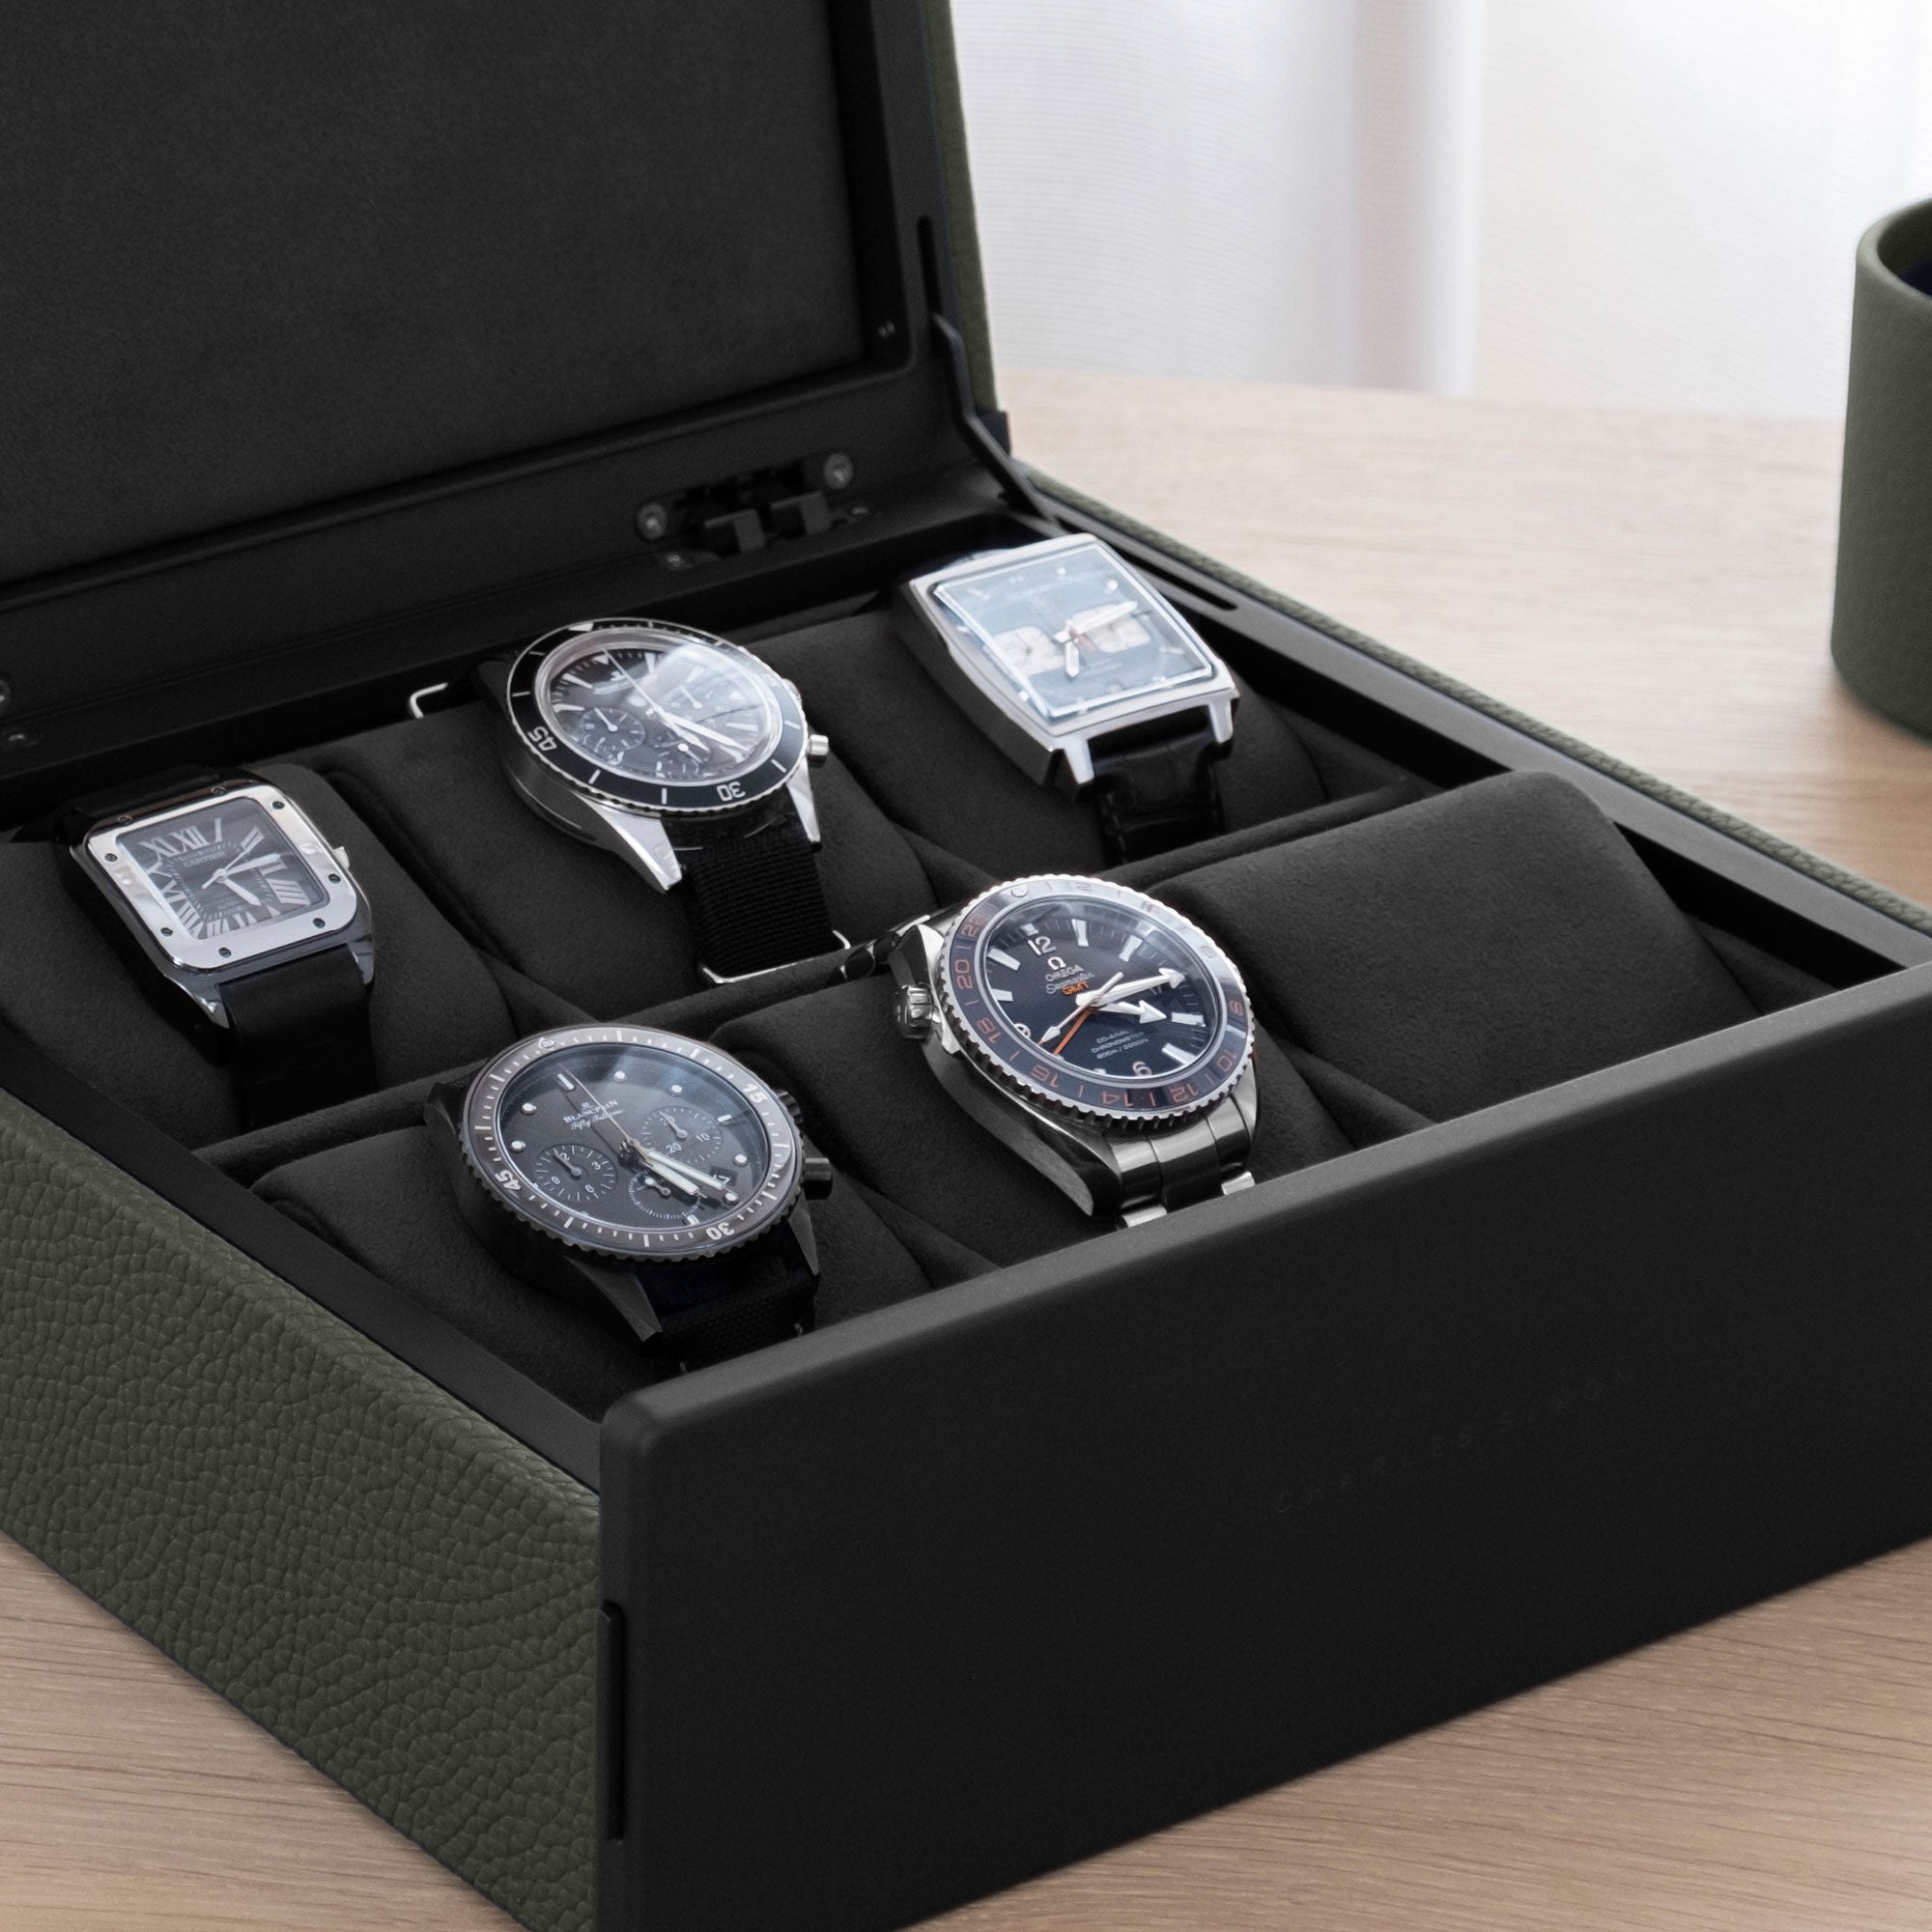 Lifestyle shot of Spence luxury watch box for 6 watches filled with men's watches including Jaeger Lecoultre, Blancpain and Omega placed on removable Alcantara cushions